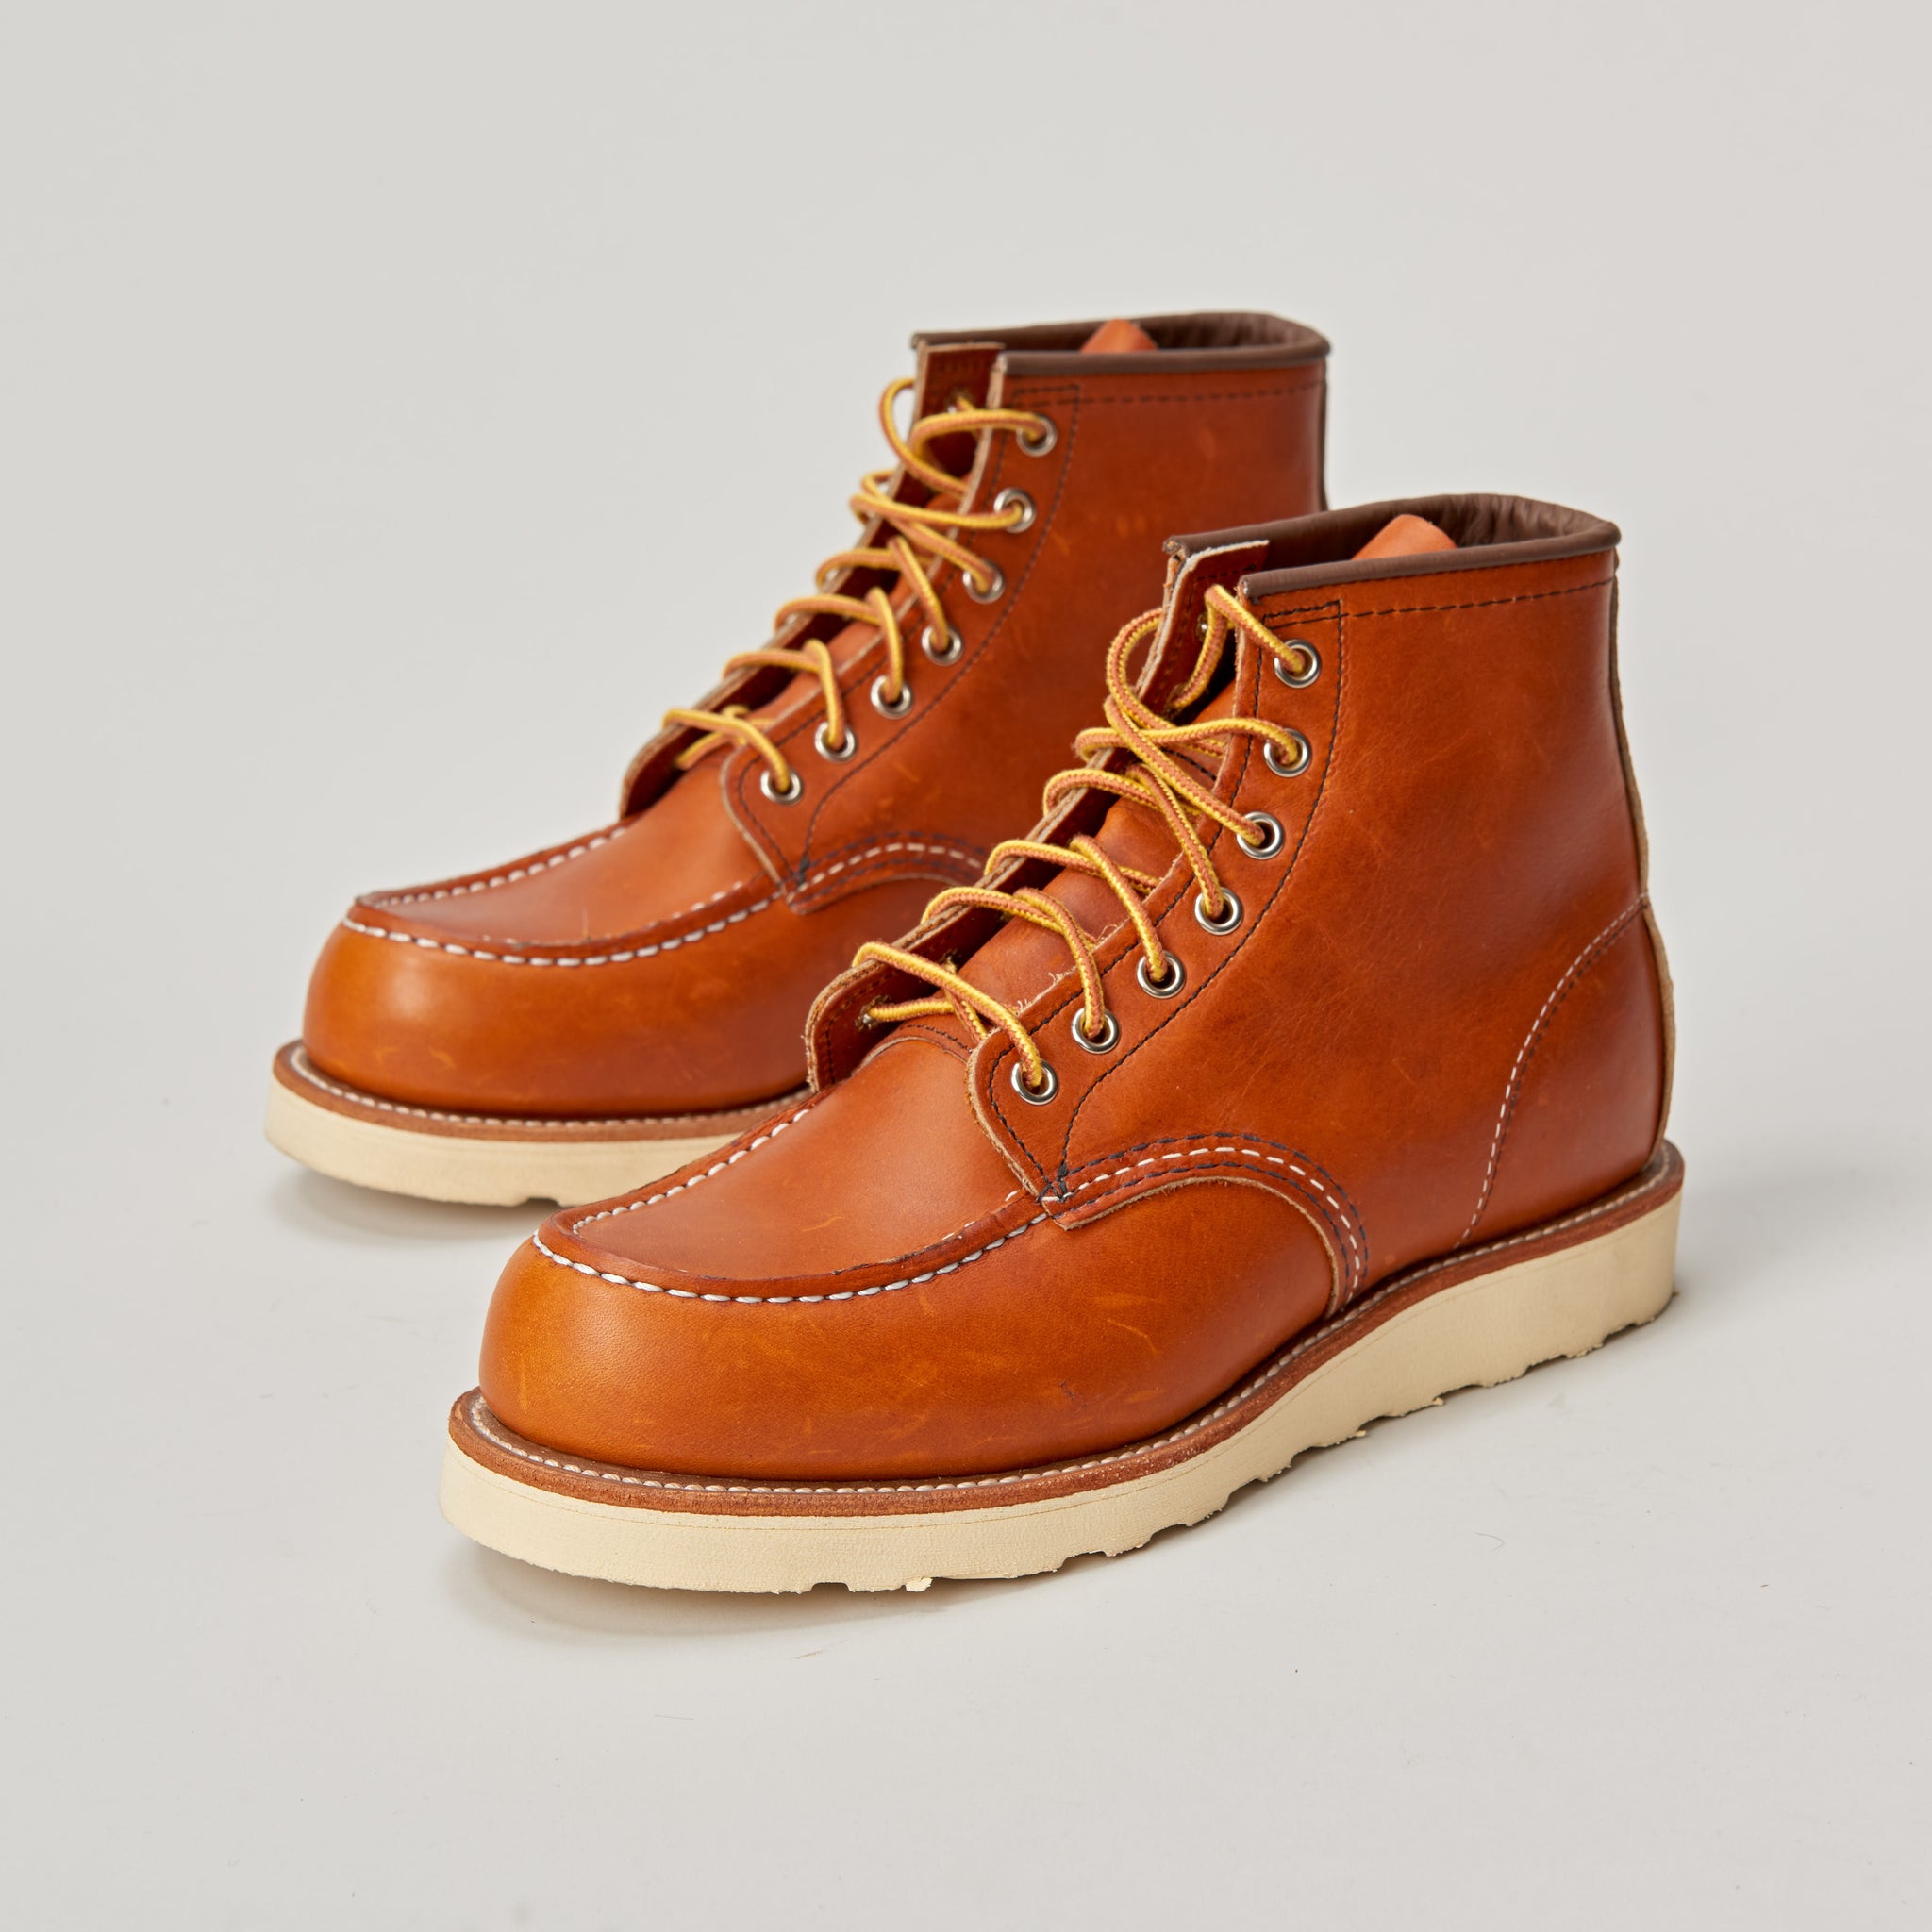 red wing moc toe 875